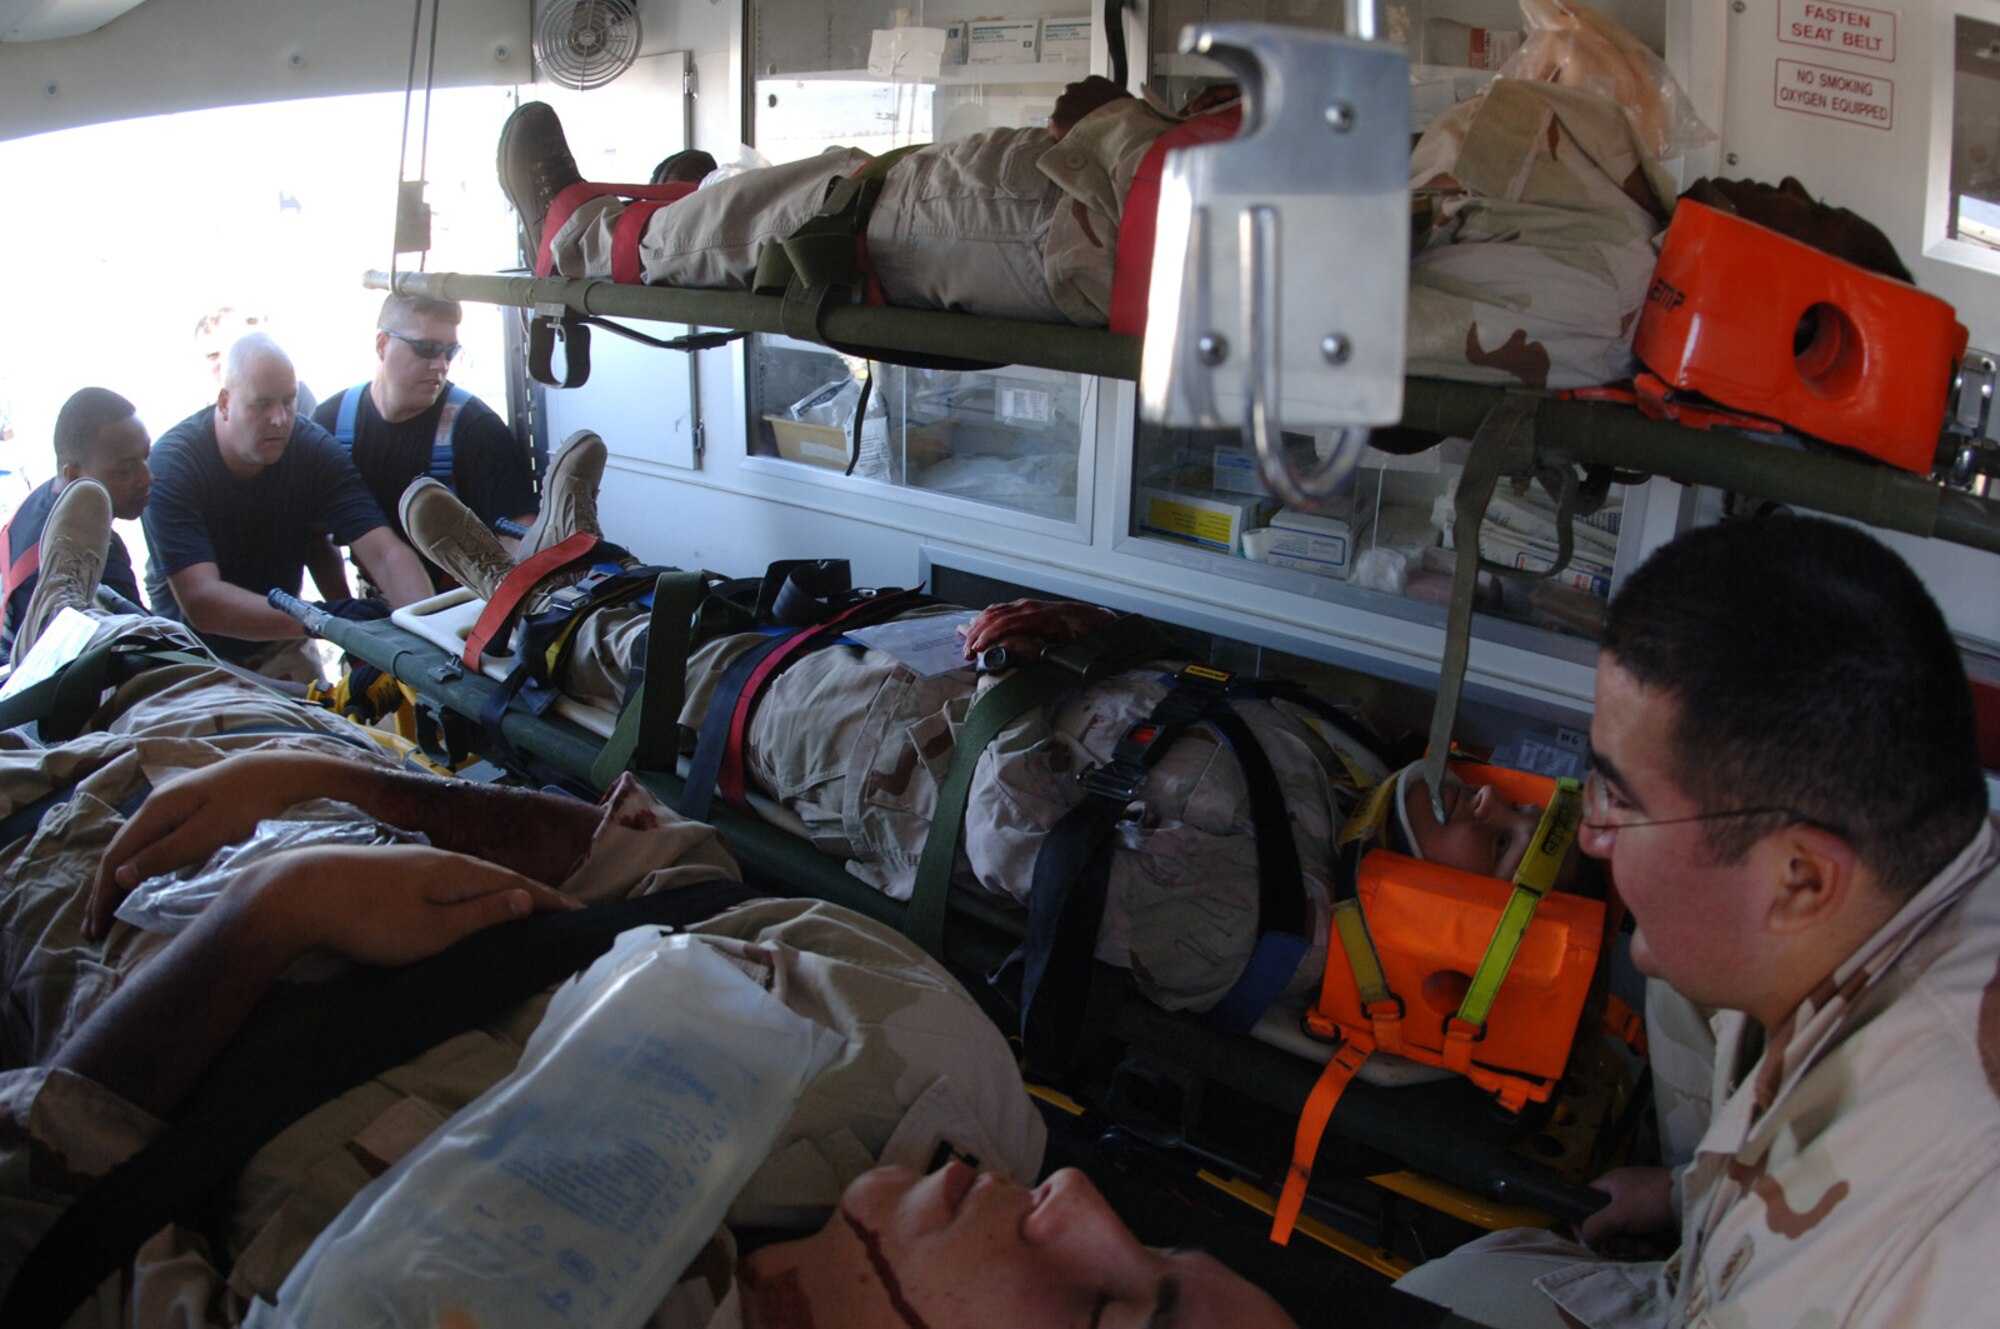 SOUTHWEST ASIA - Emergency services Airmen load victims in an ambulance following an aircraft incident during a Major Accident Response Exercise at a Southwest Asia air base Dec. 14.  (U. S. Air Force photo/Staff Sgt. Douglas Olsen)